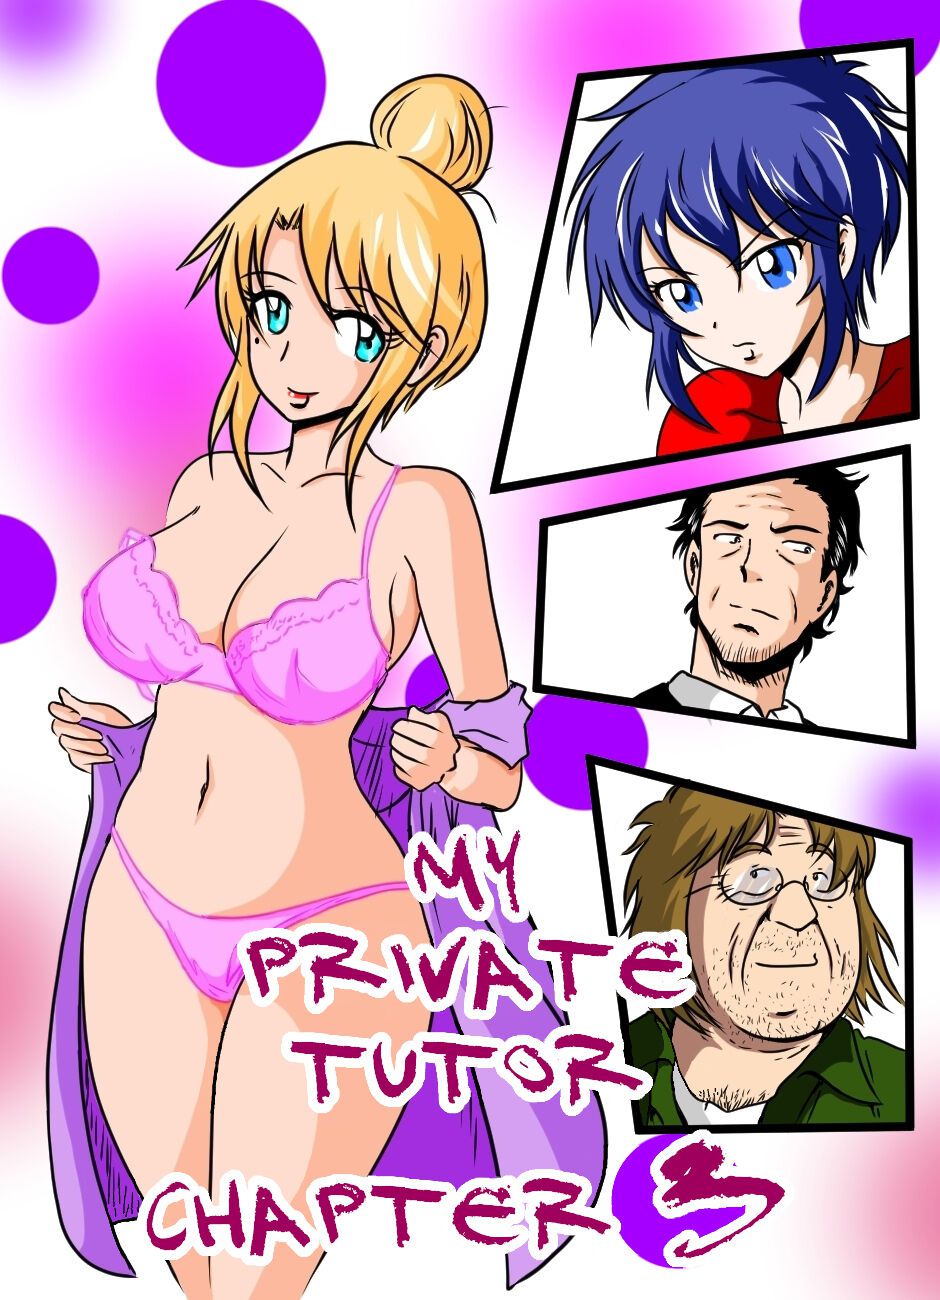 [Ka-iN] Tutor Particular (My Private Tutor) Chapter 1 - 3 [English] (in progress) 63